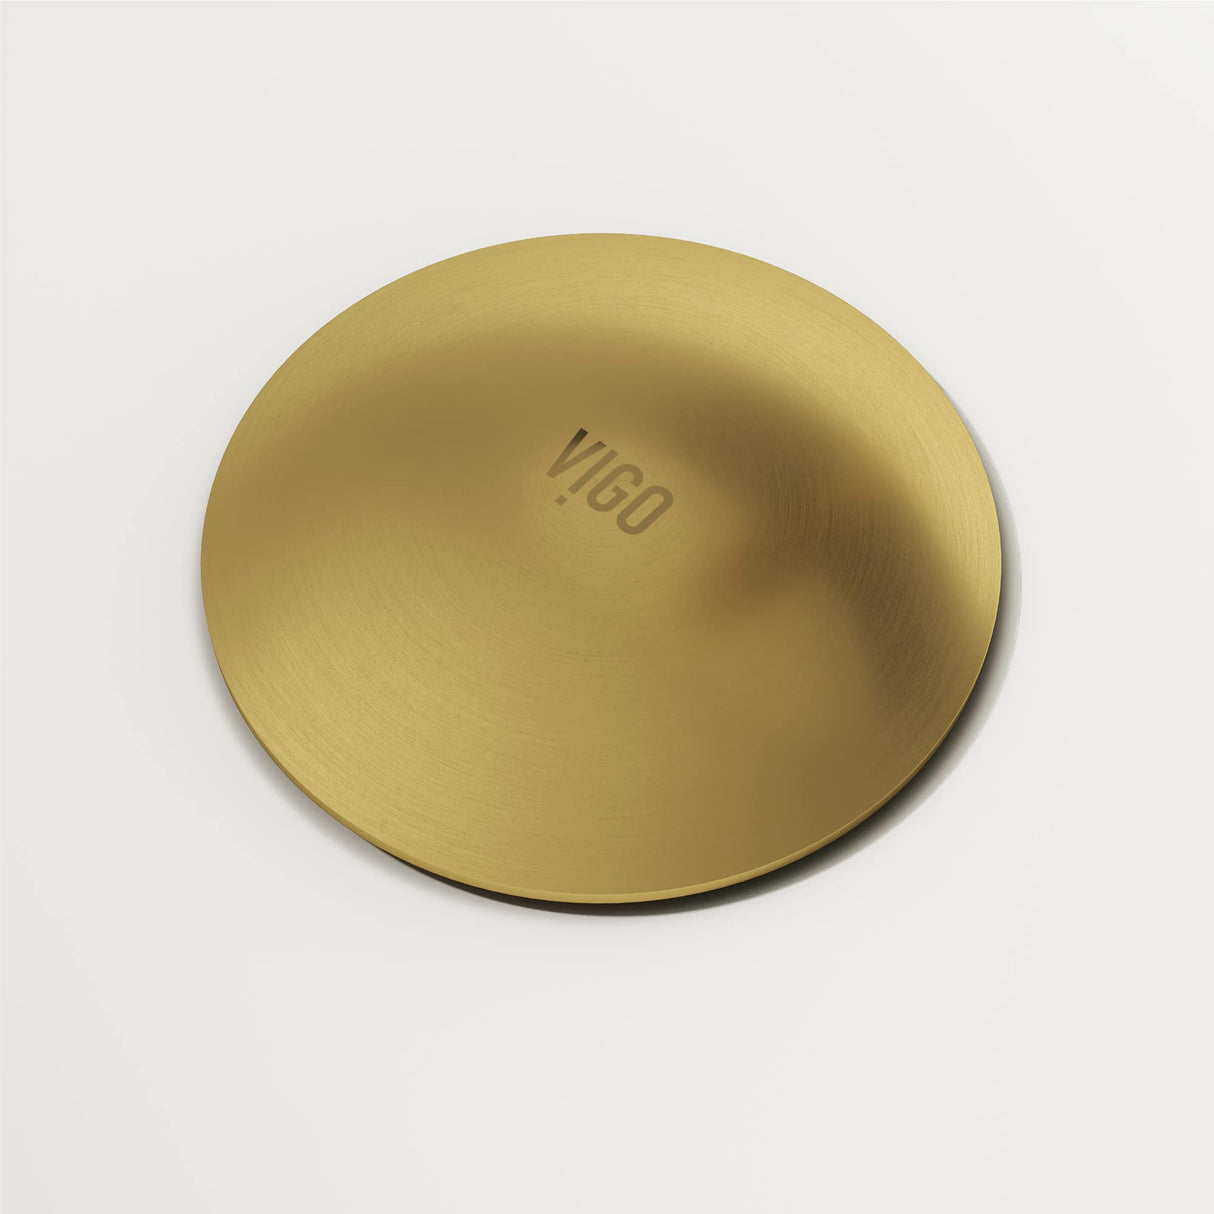 VIGO 2.75" Diameter Vessel Bathroom Sink Pop-Up Drain and Mounting Ring Without Overflow in Matte Gold Finish